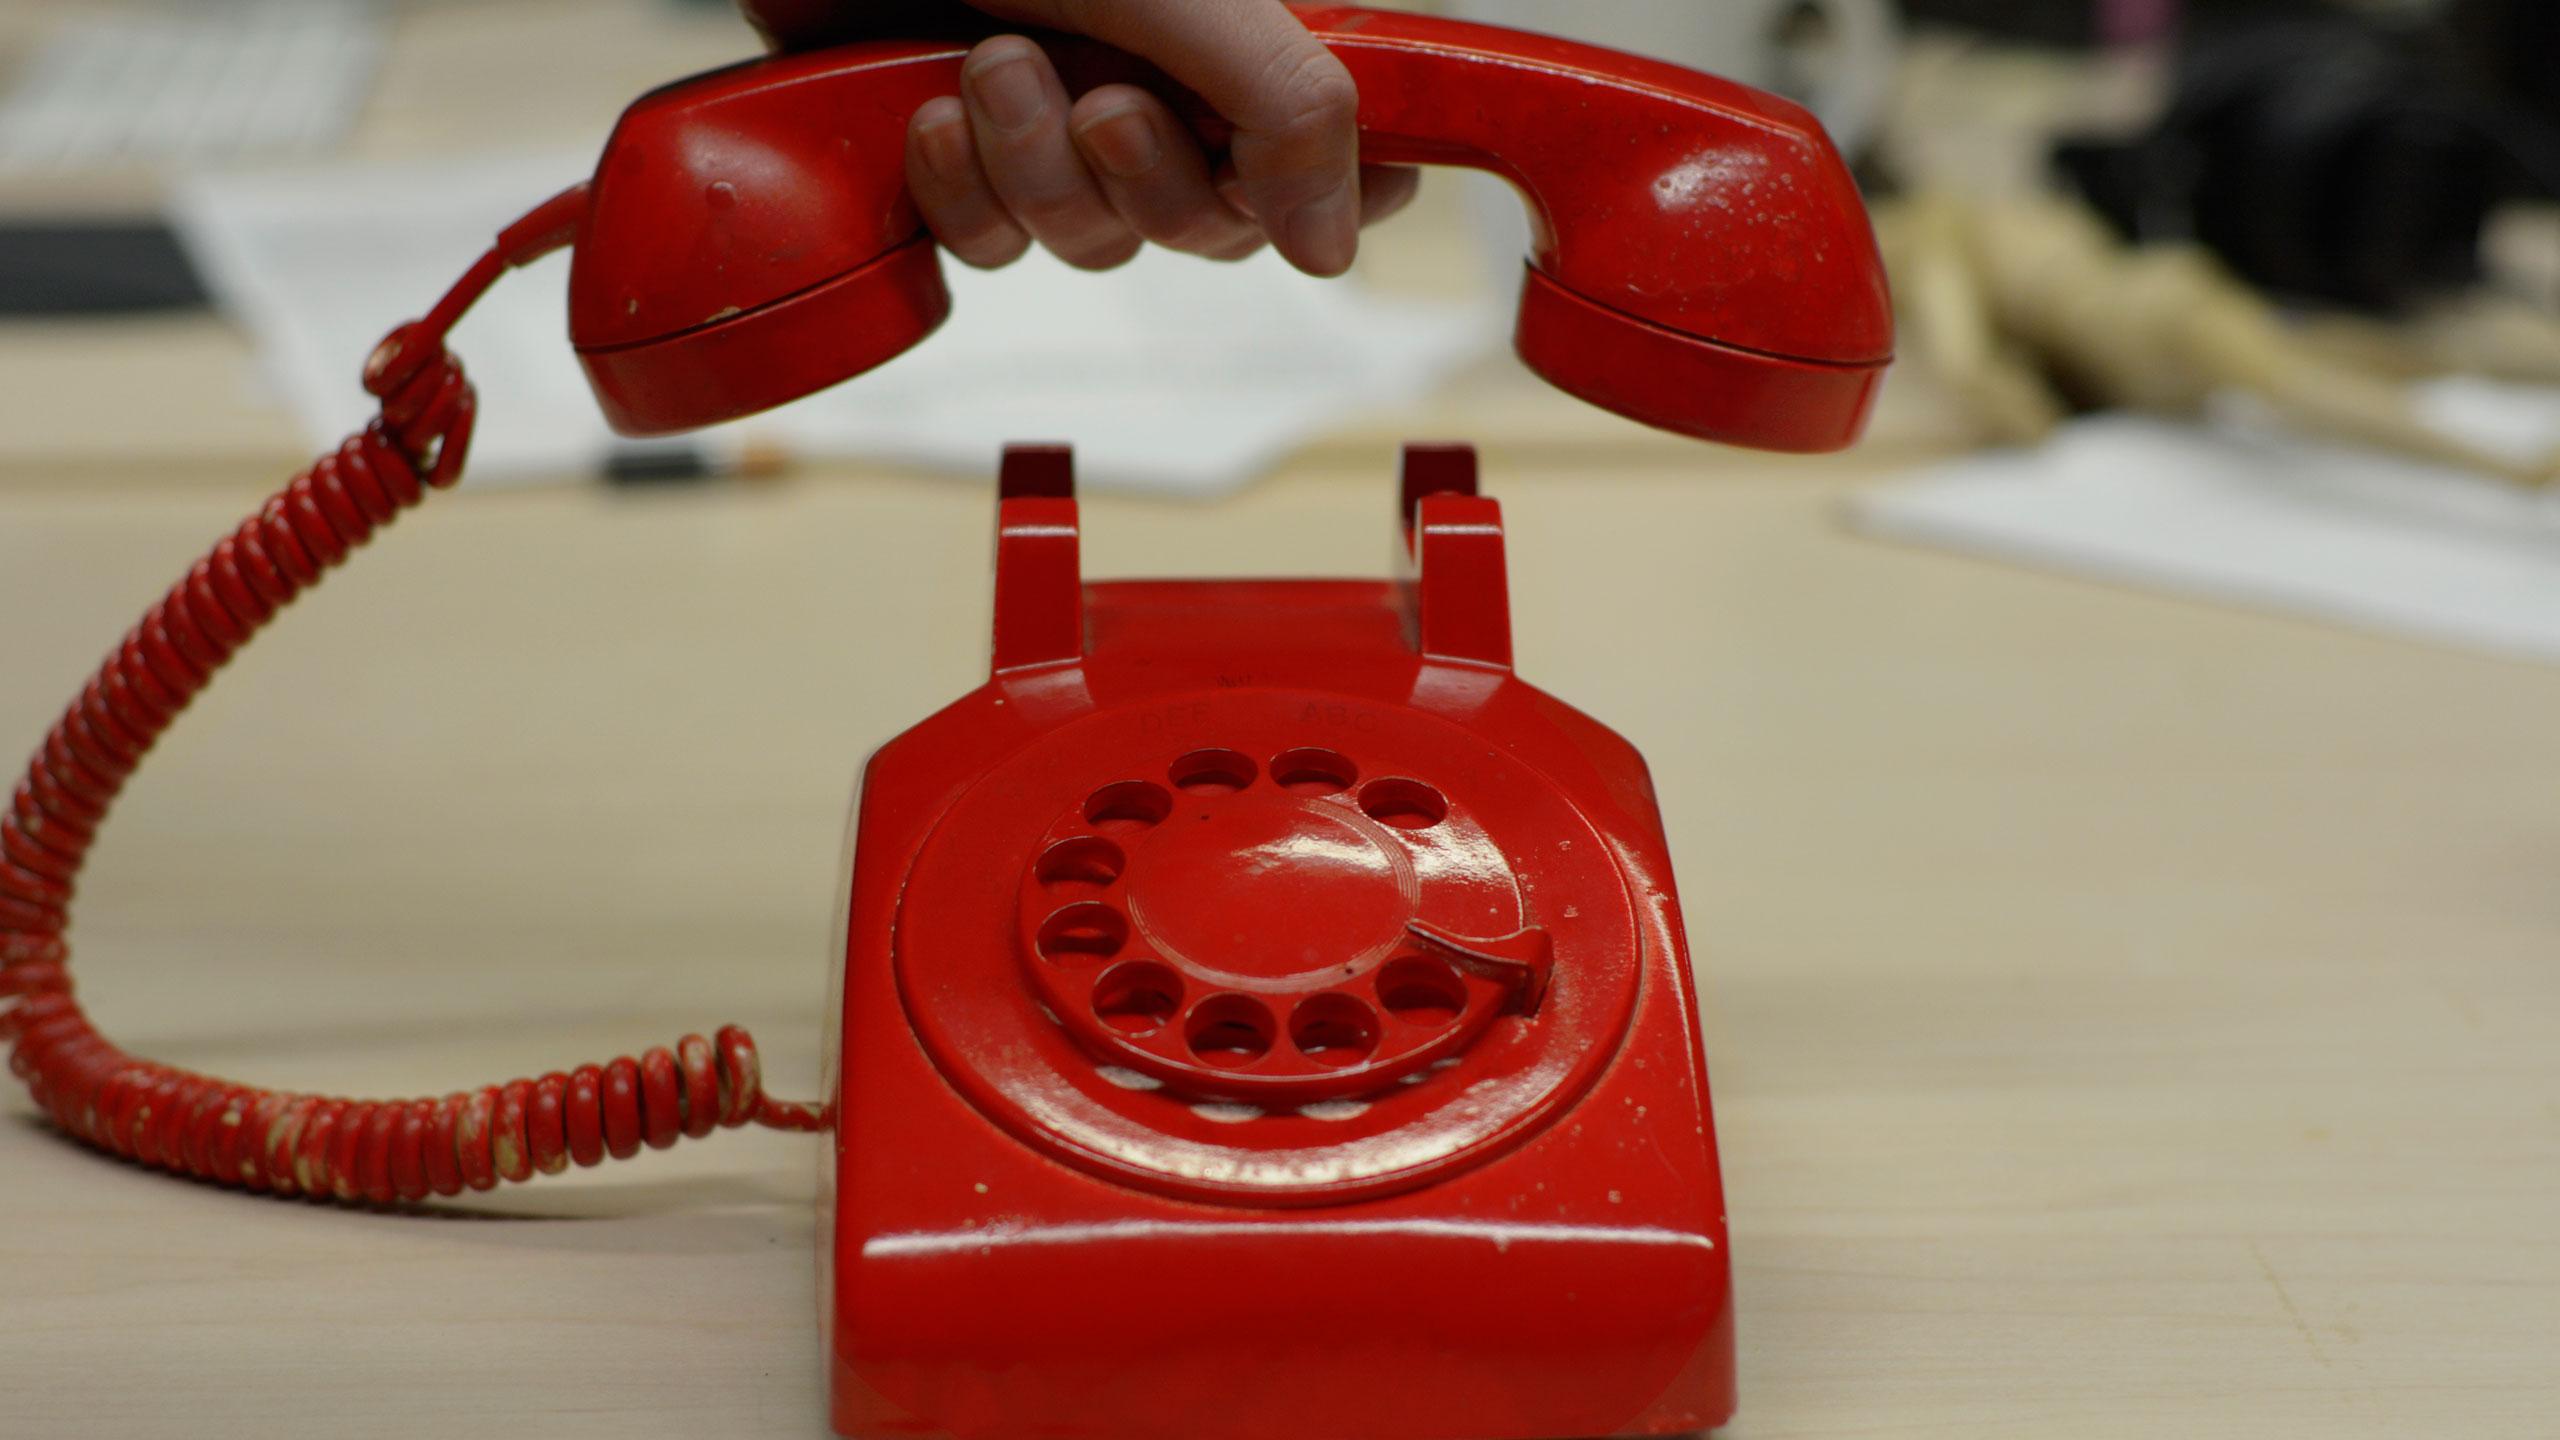 A red old style phone with a chord and dial.